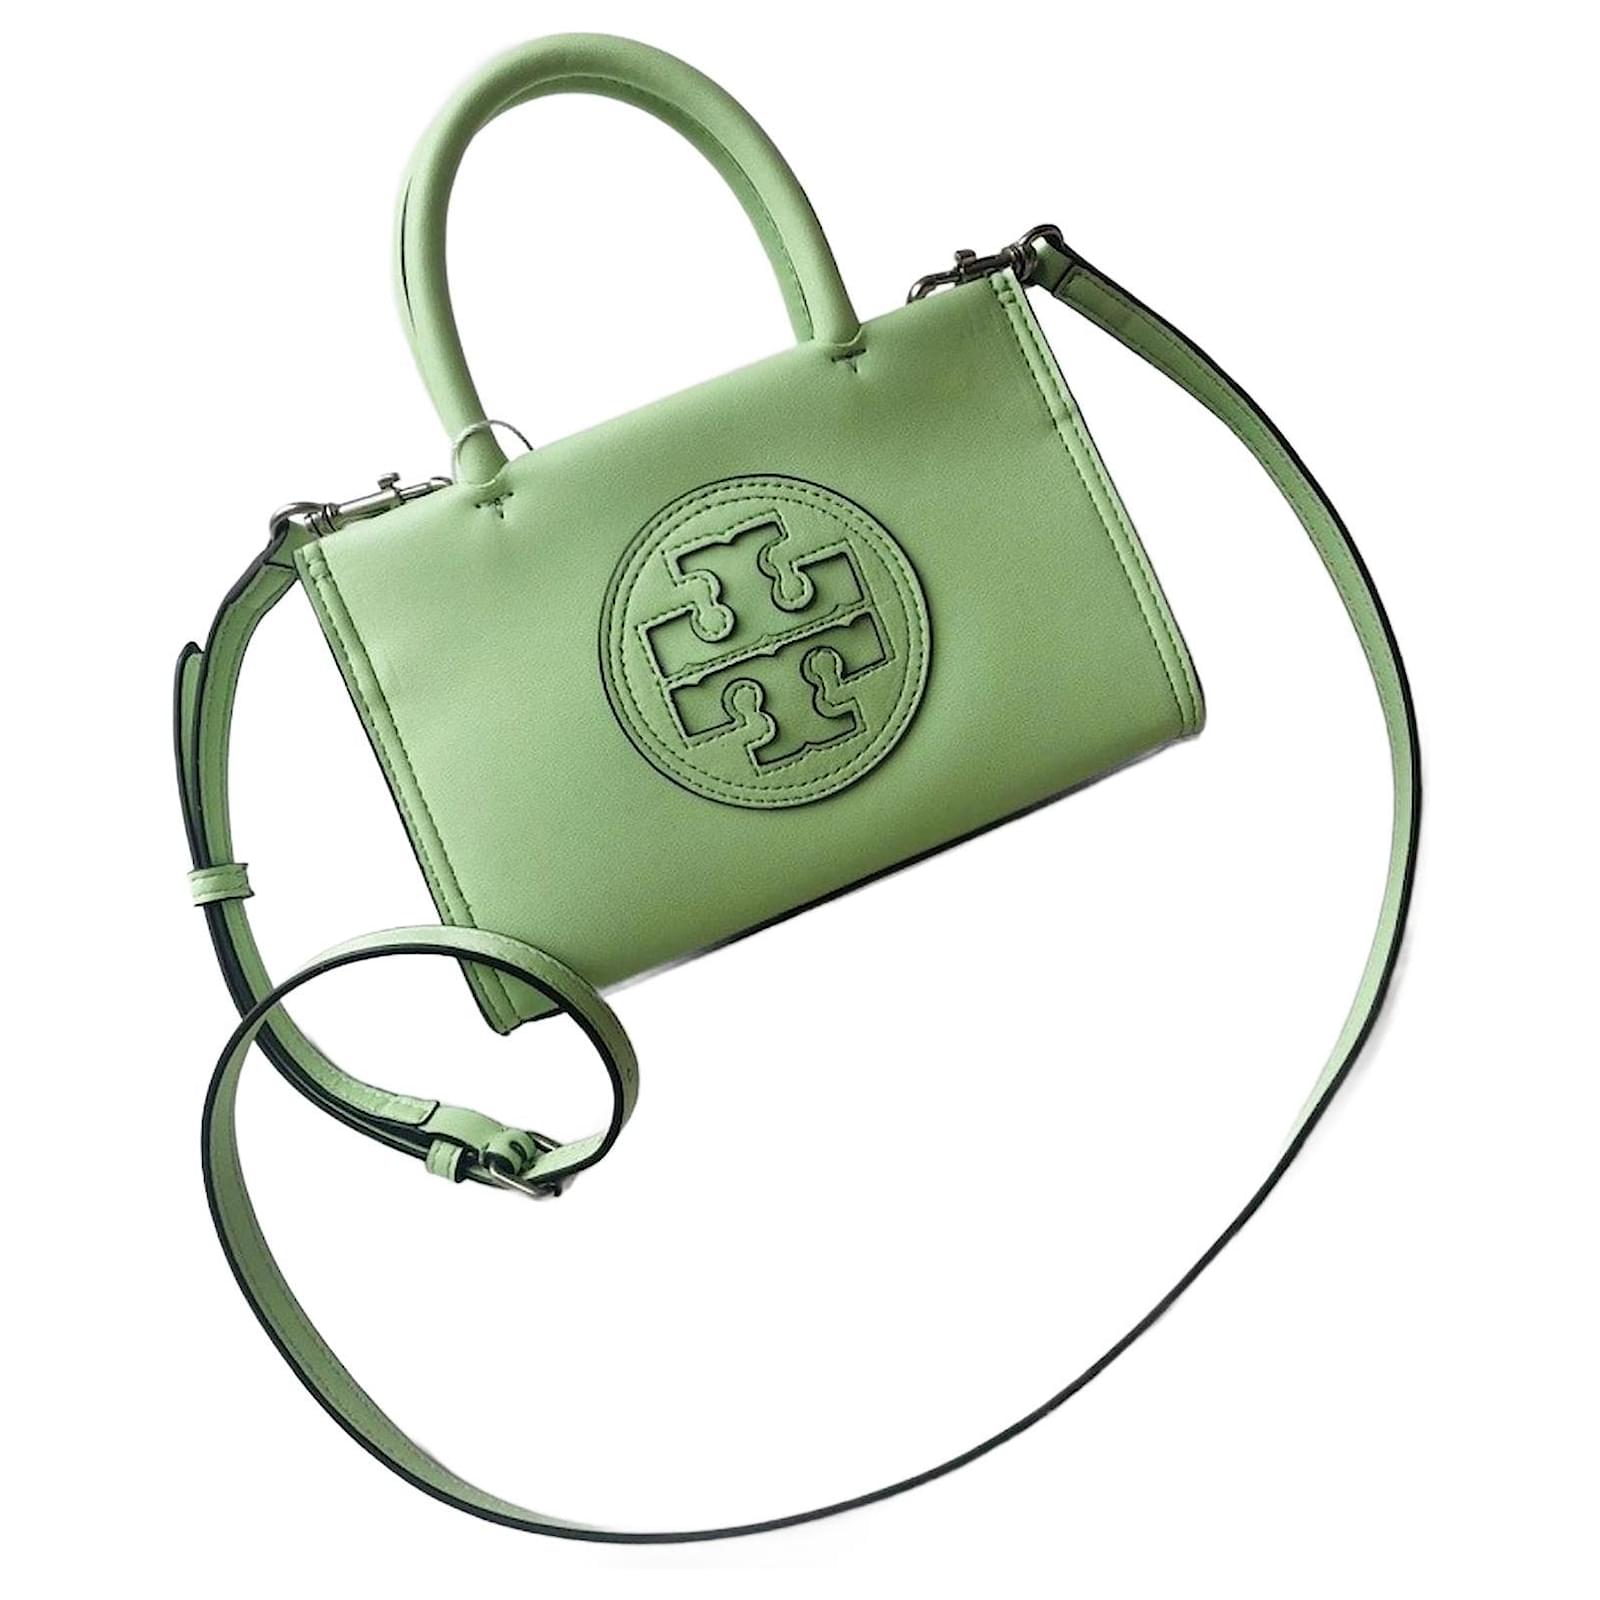 Tory Burch Tote Bags Woman Color Green